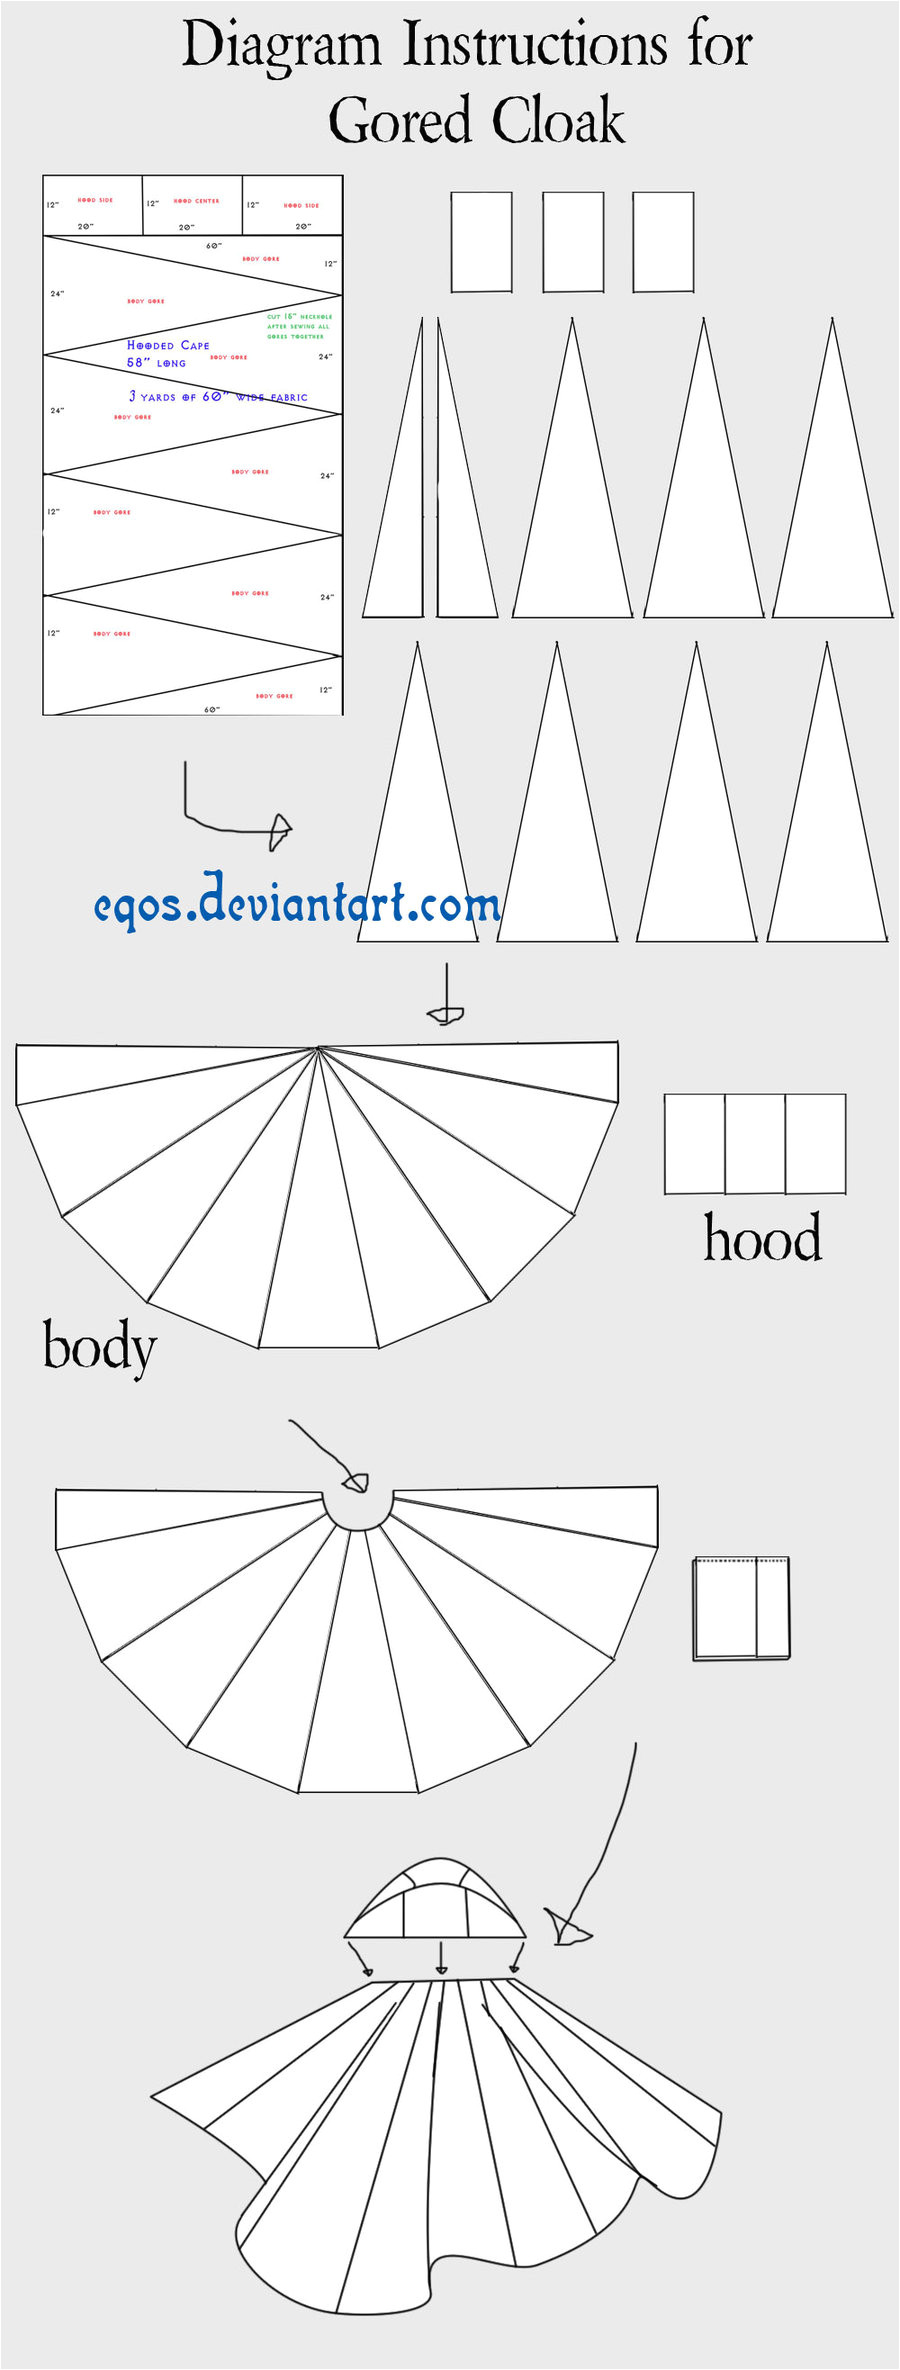 Cloak Template Instructions for Gored Cloak by Eqos On Deviantart